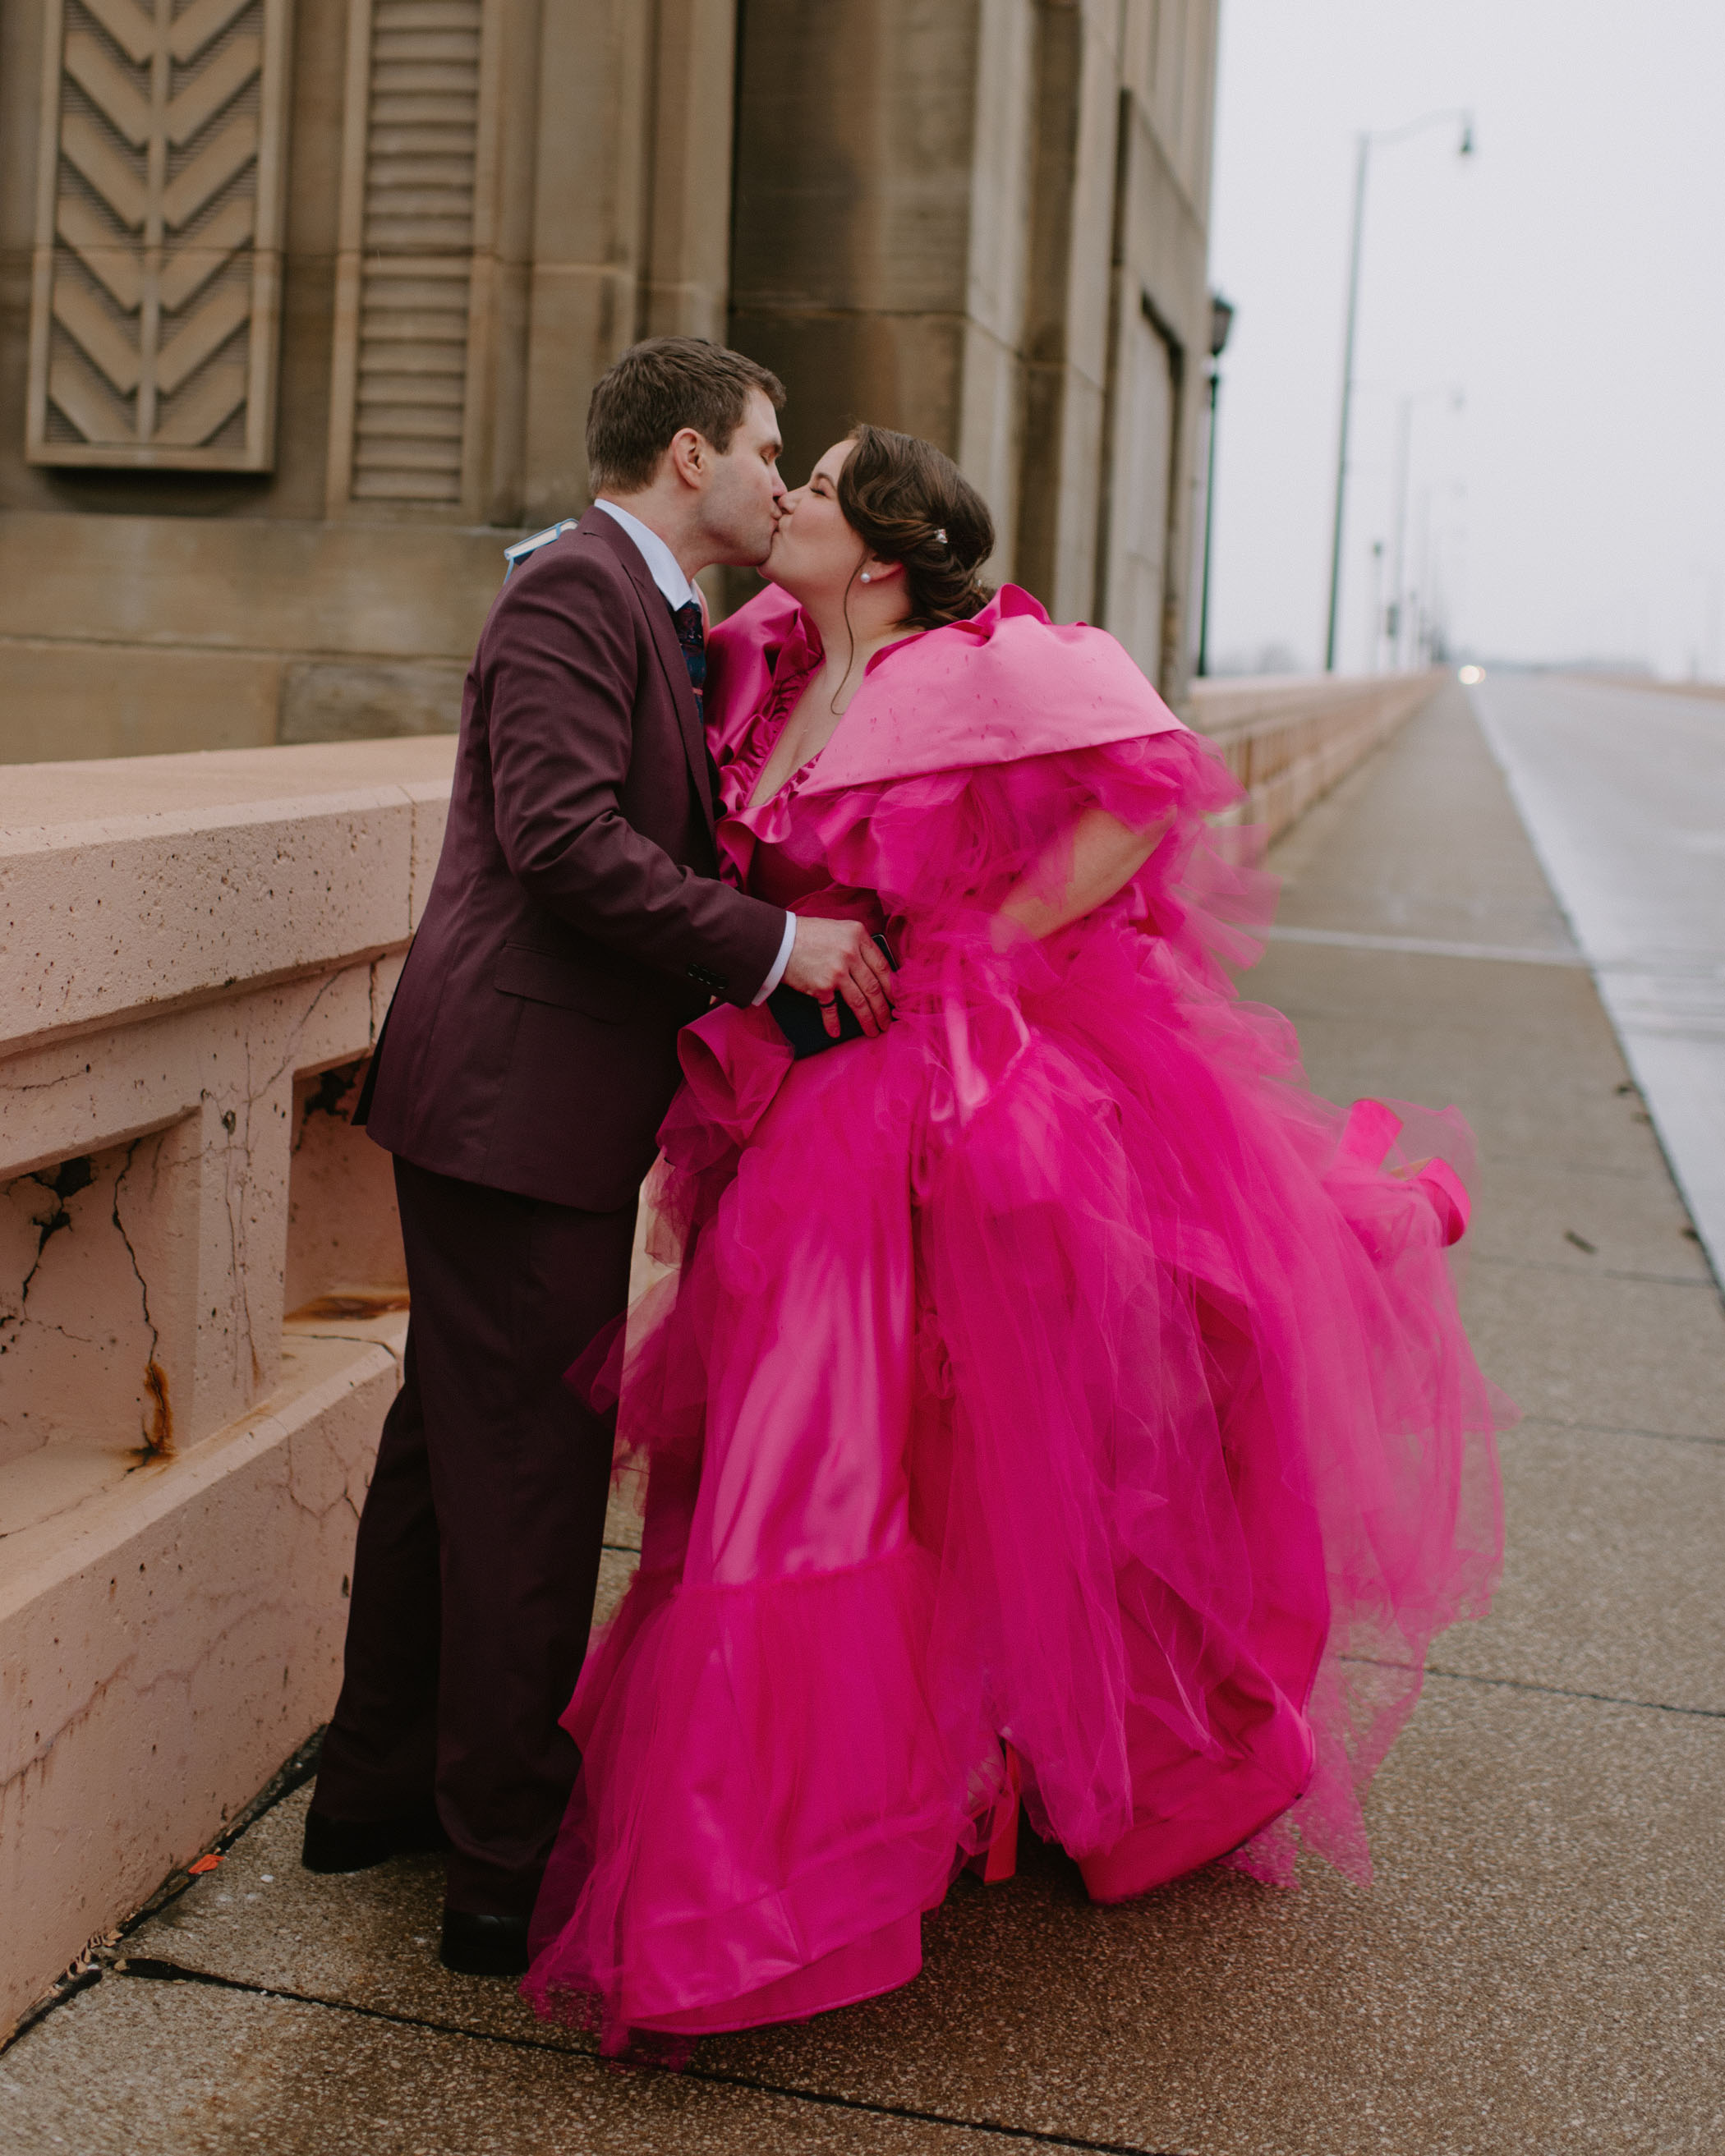 The Bride Wore a Bright Pink Dress for This Non-Traditional NYE Wedding